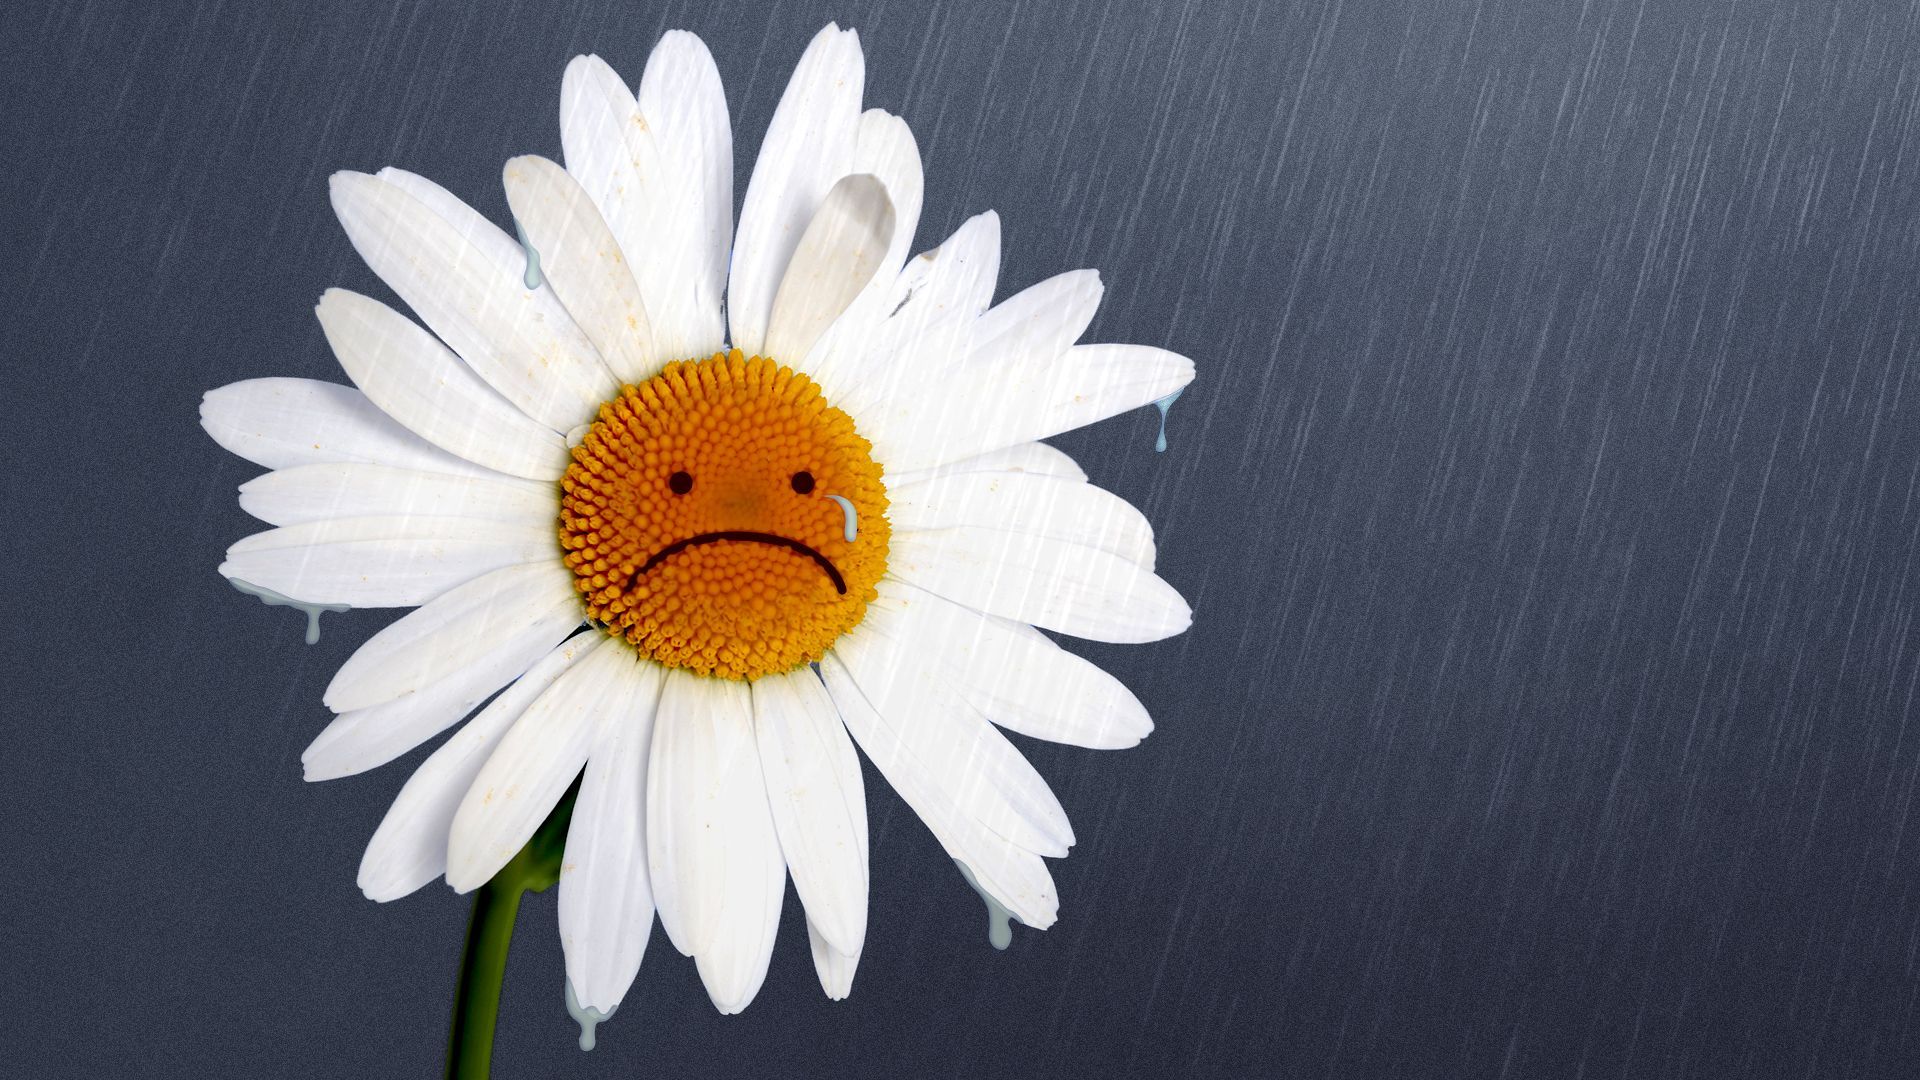 Illustration of a daisy flower with a frowning face in its center. The flower is in a dark, rainy atmosphere and has drops of water falling from its petals. 